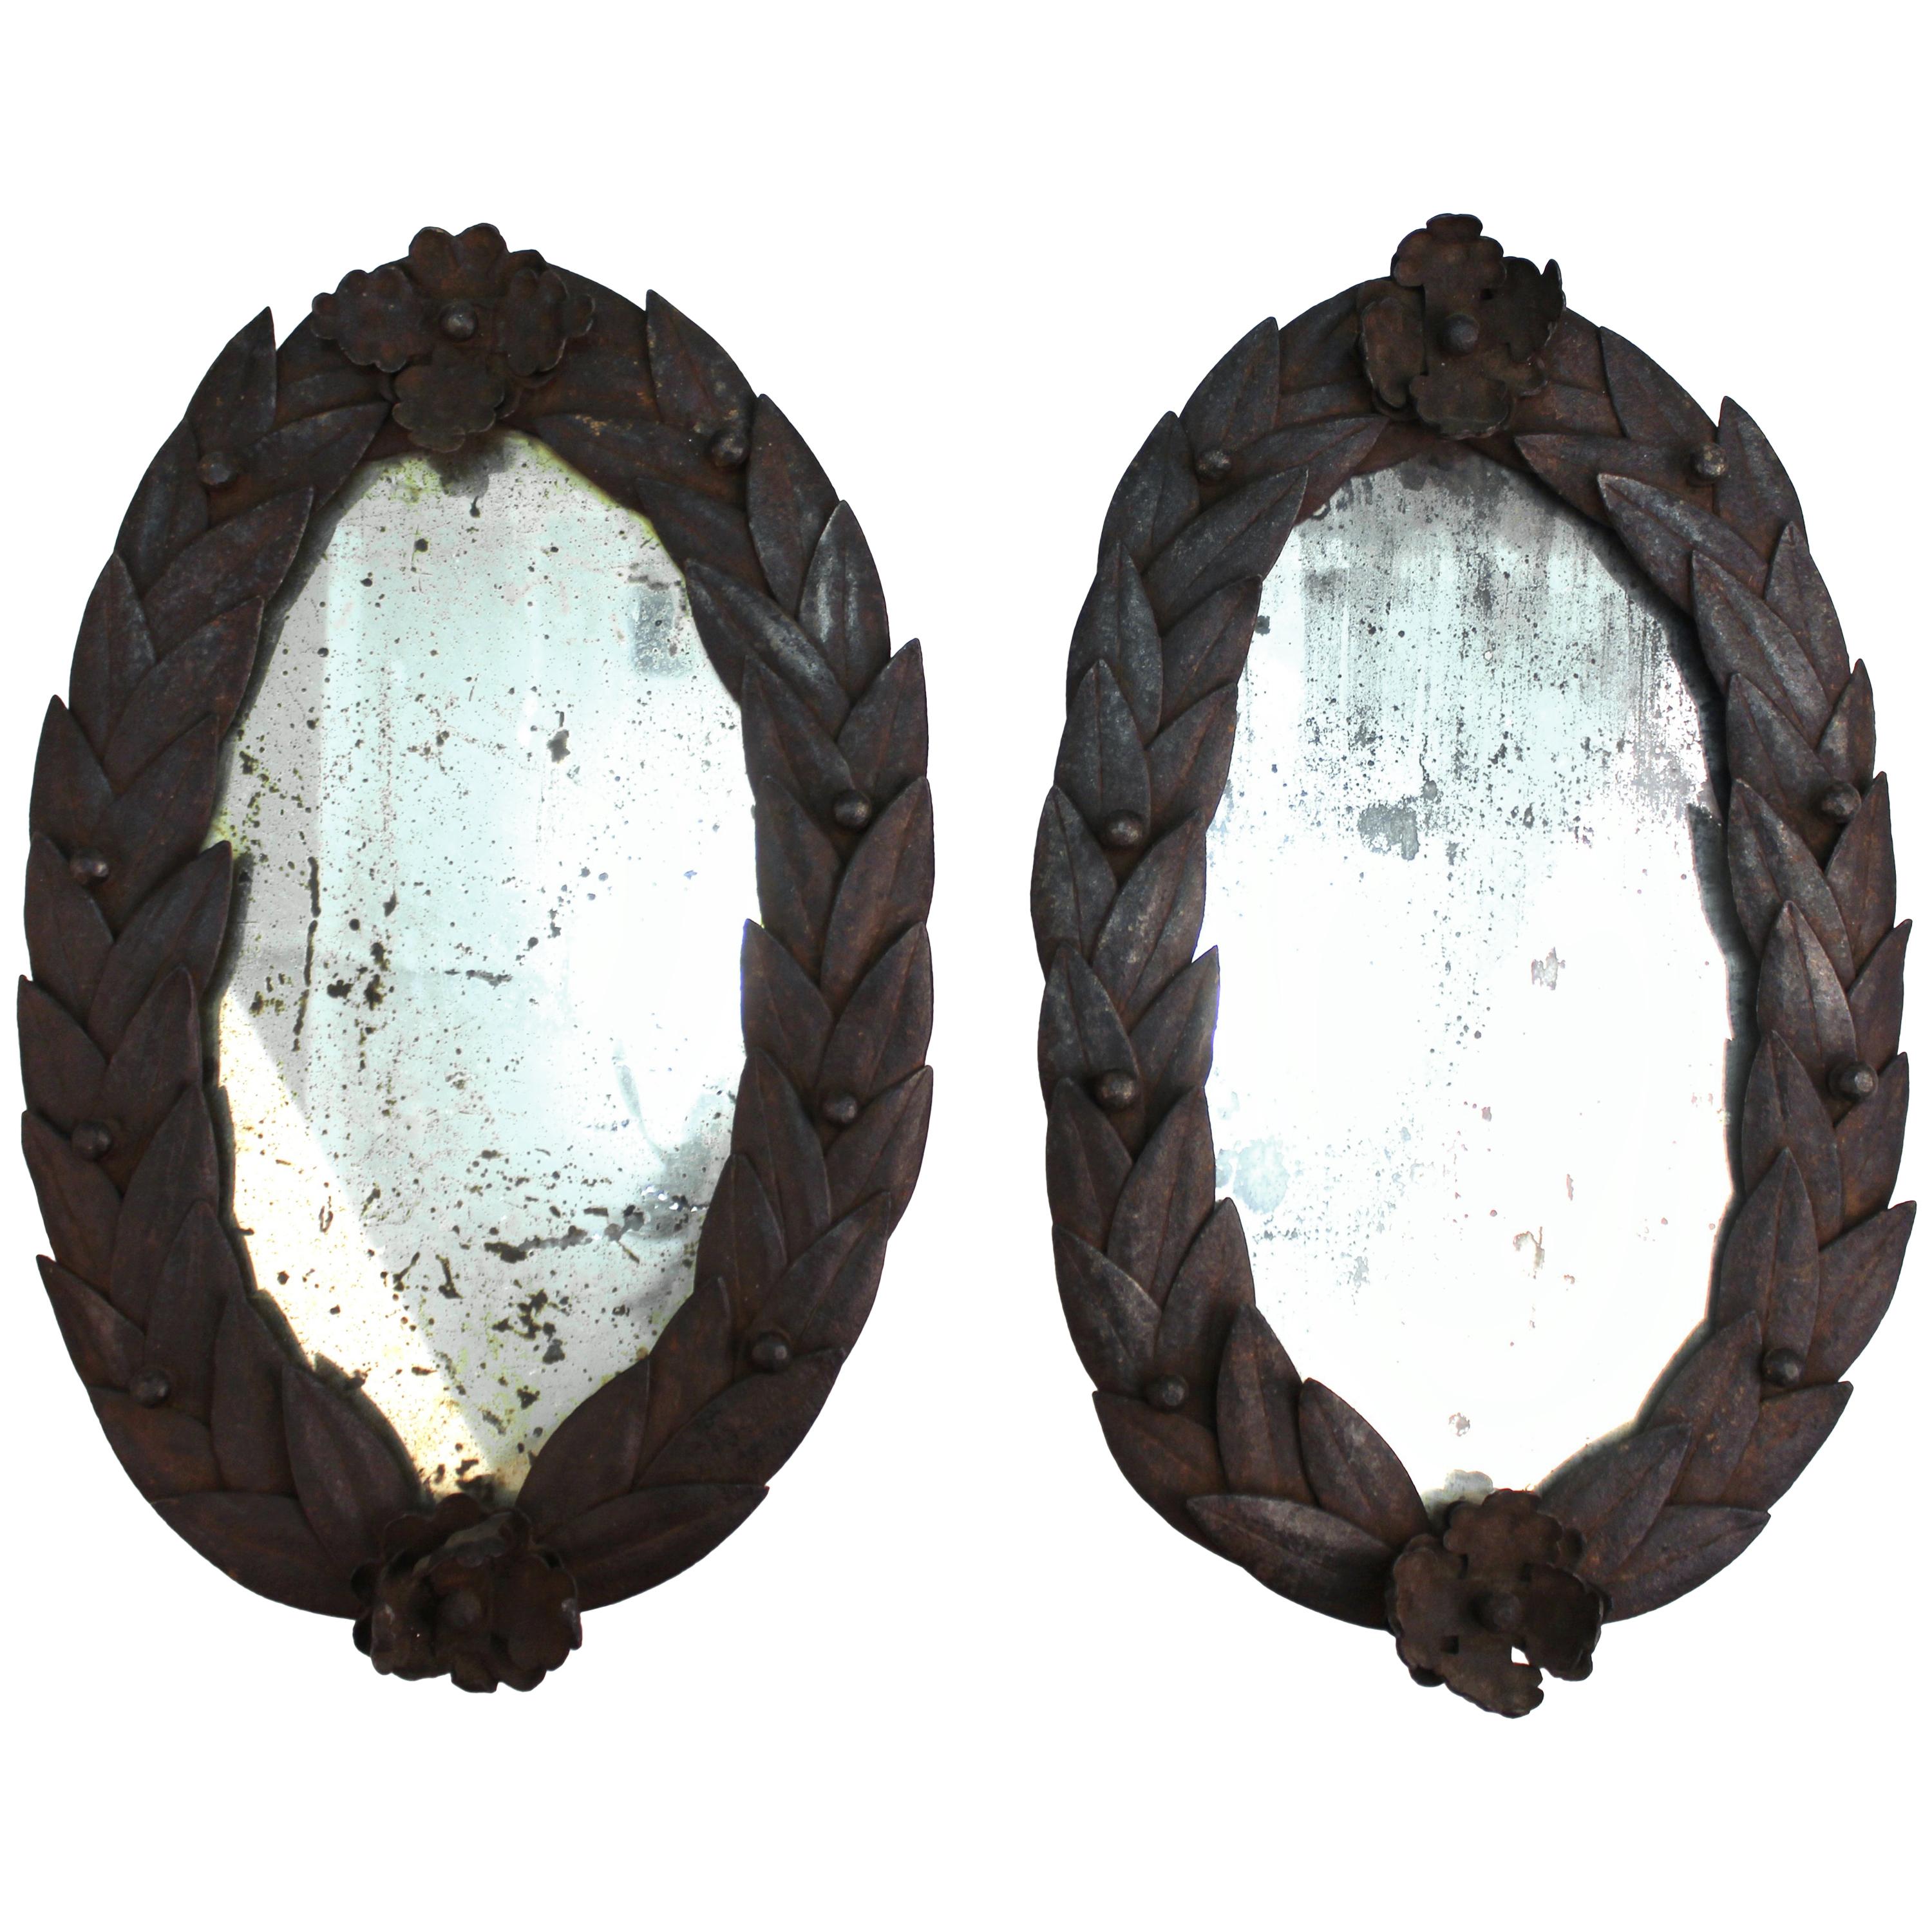 French Neoclassical Wrought Iron Mirrors with Laurel Leaf Border